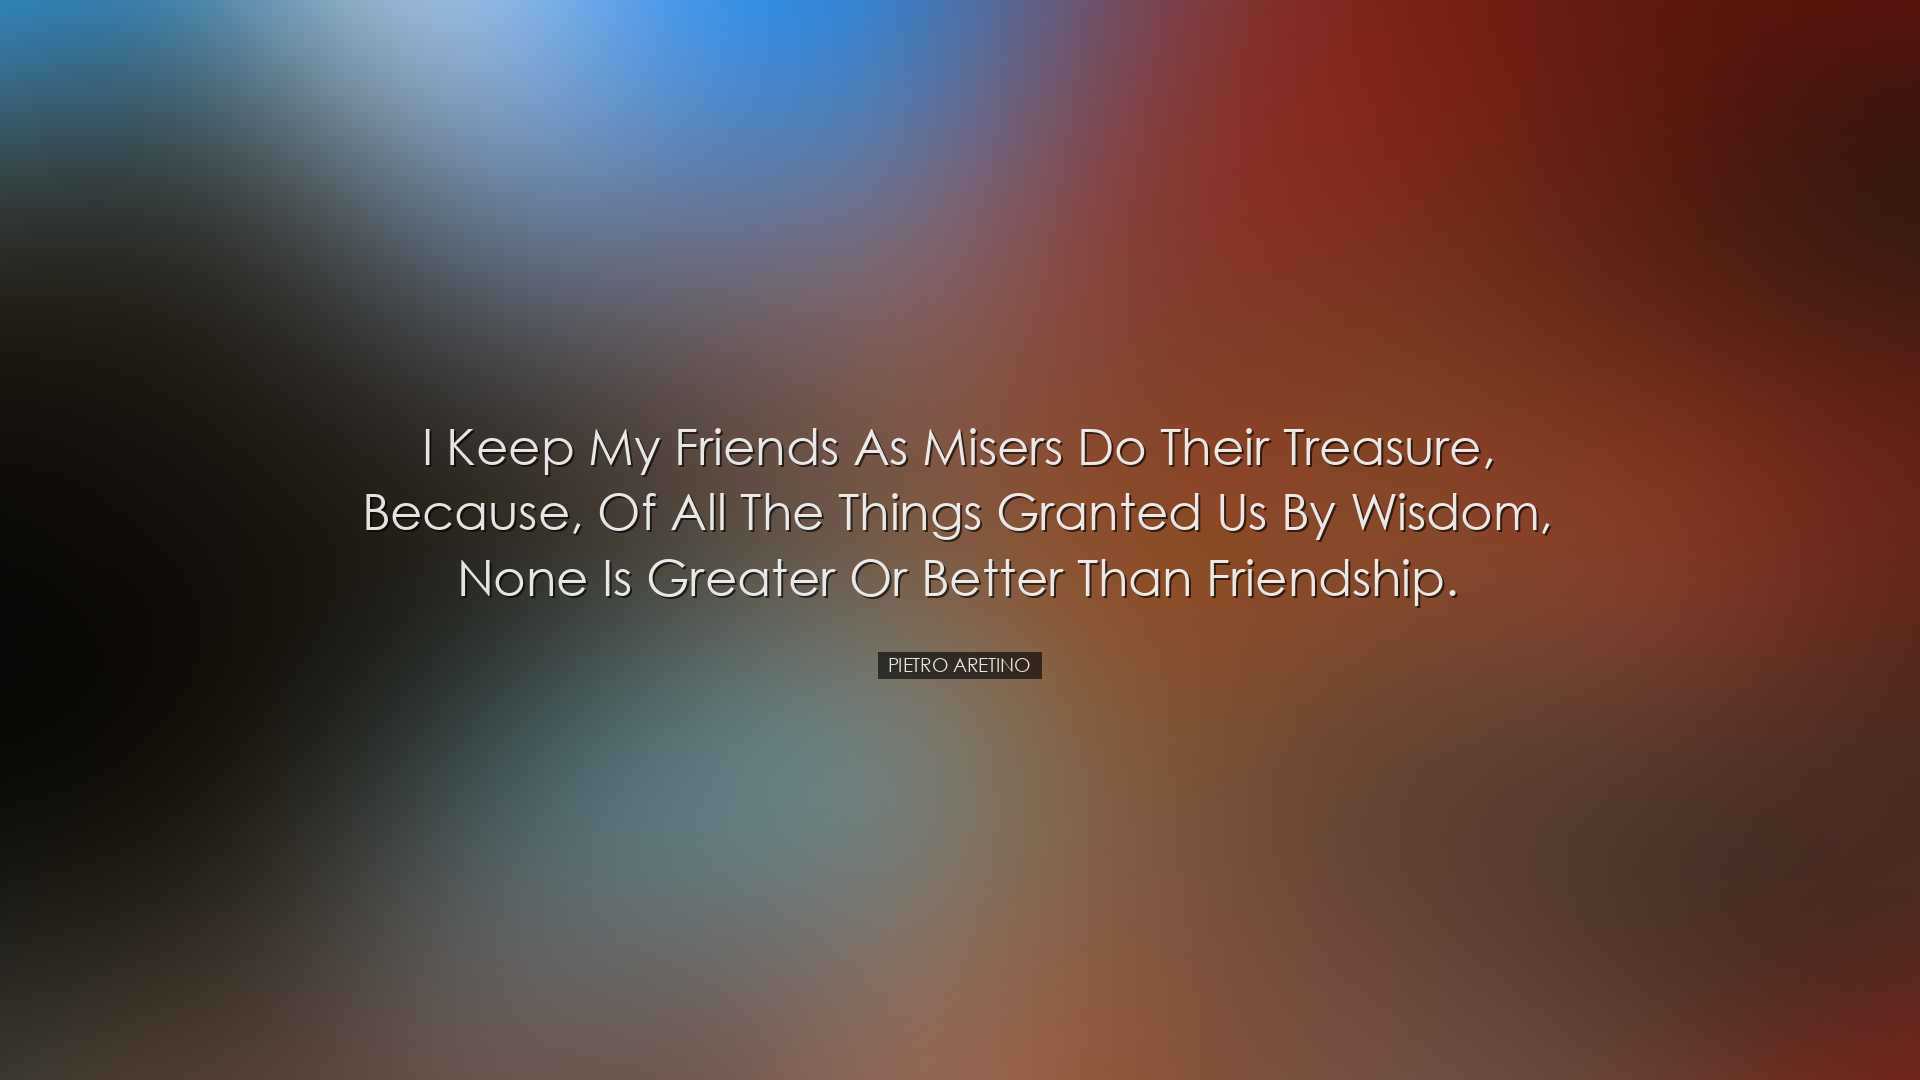 I keep my friends as misers do their treasure, because, of all the